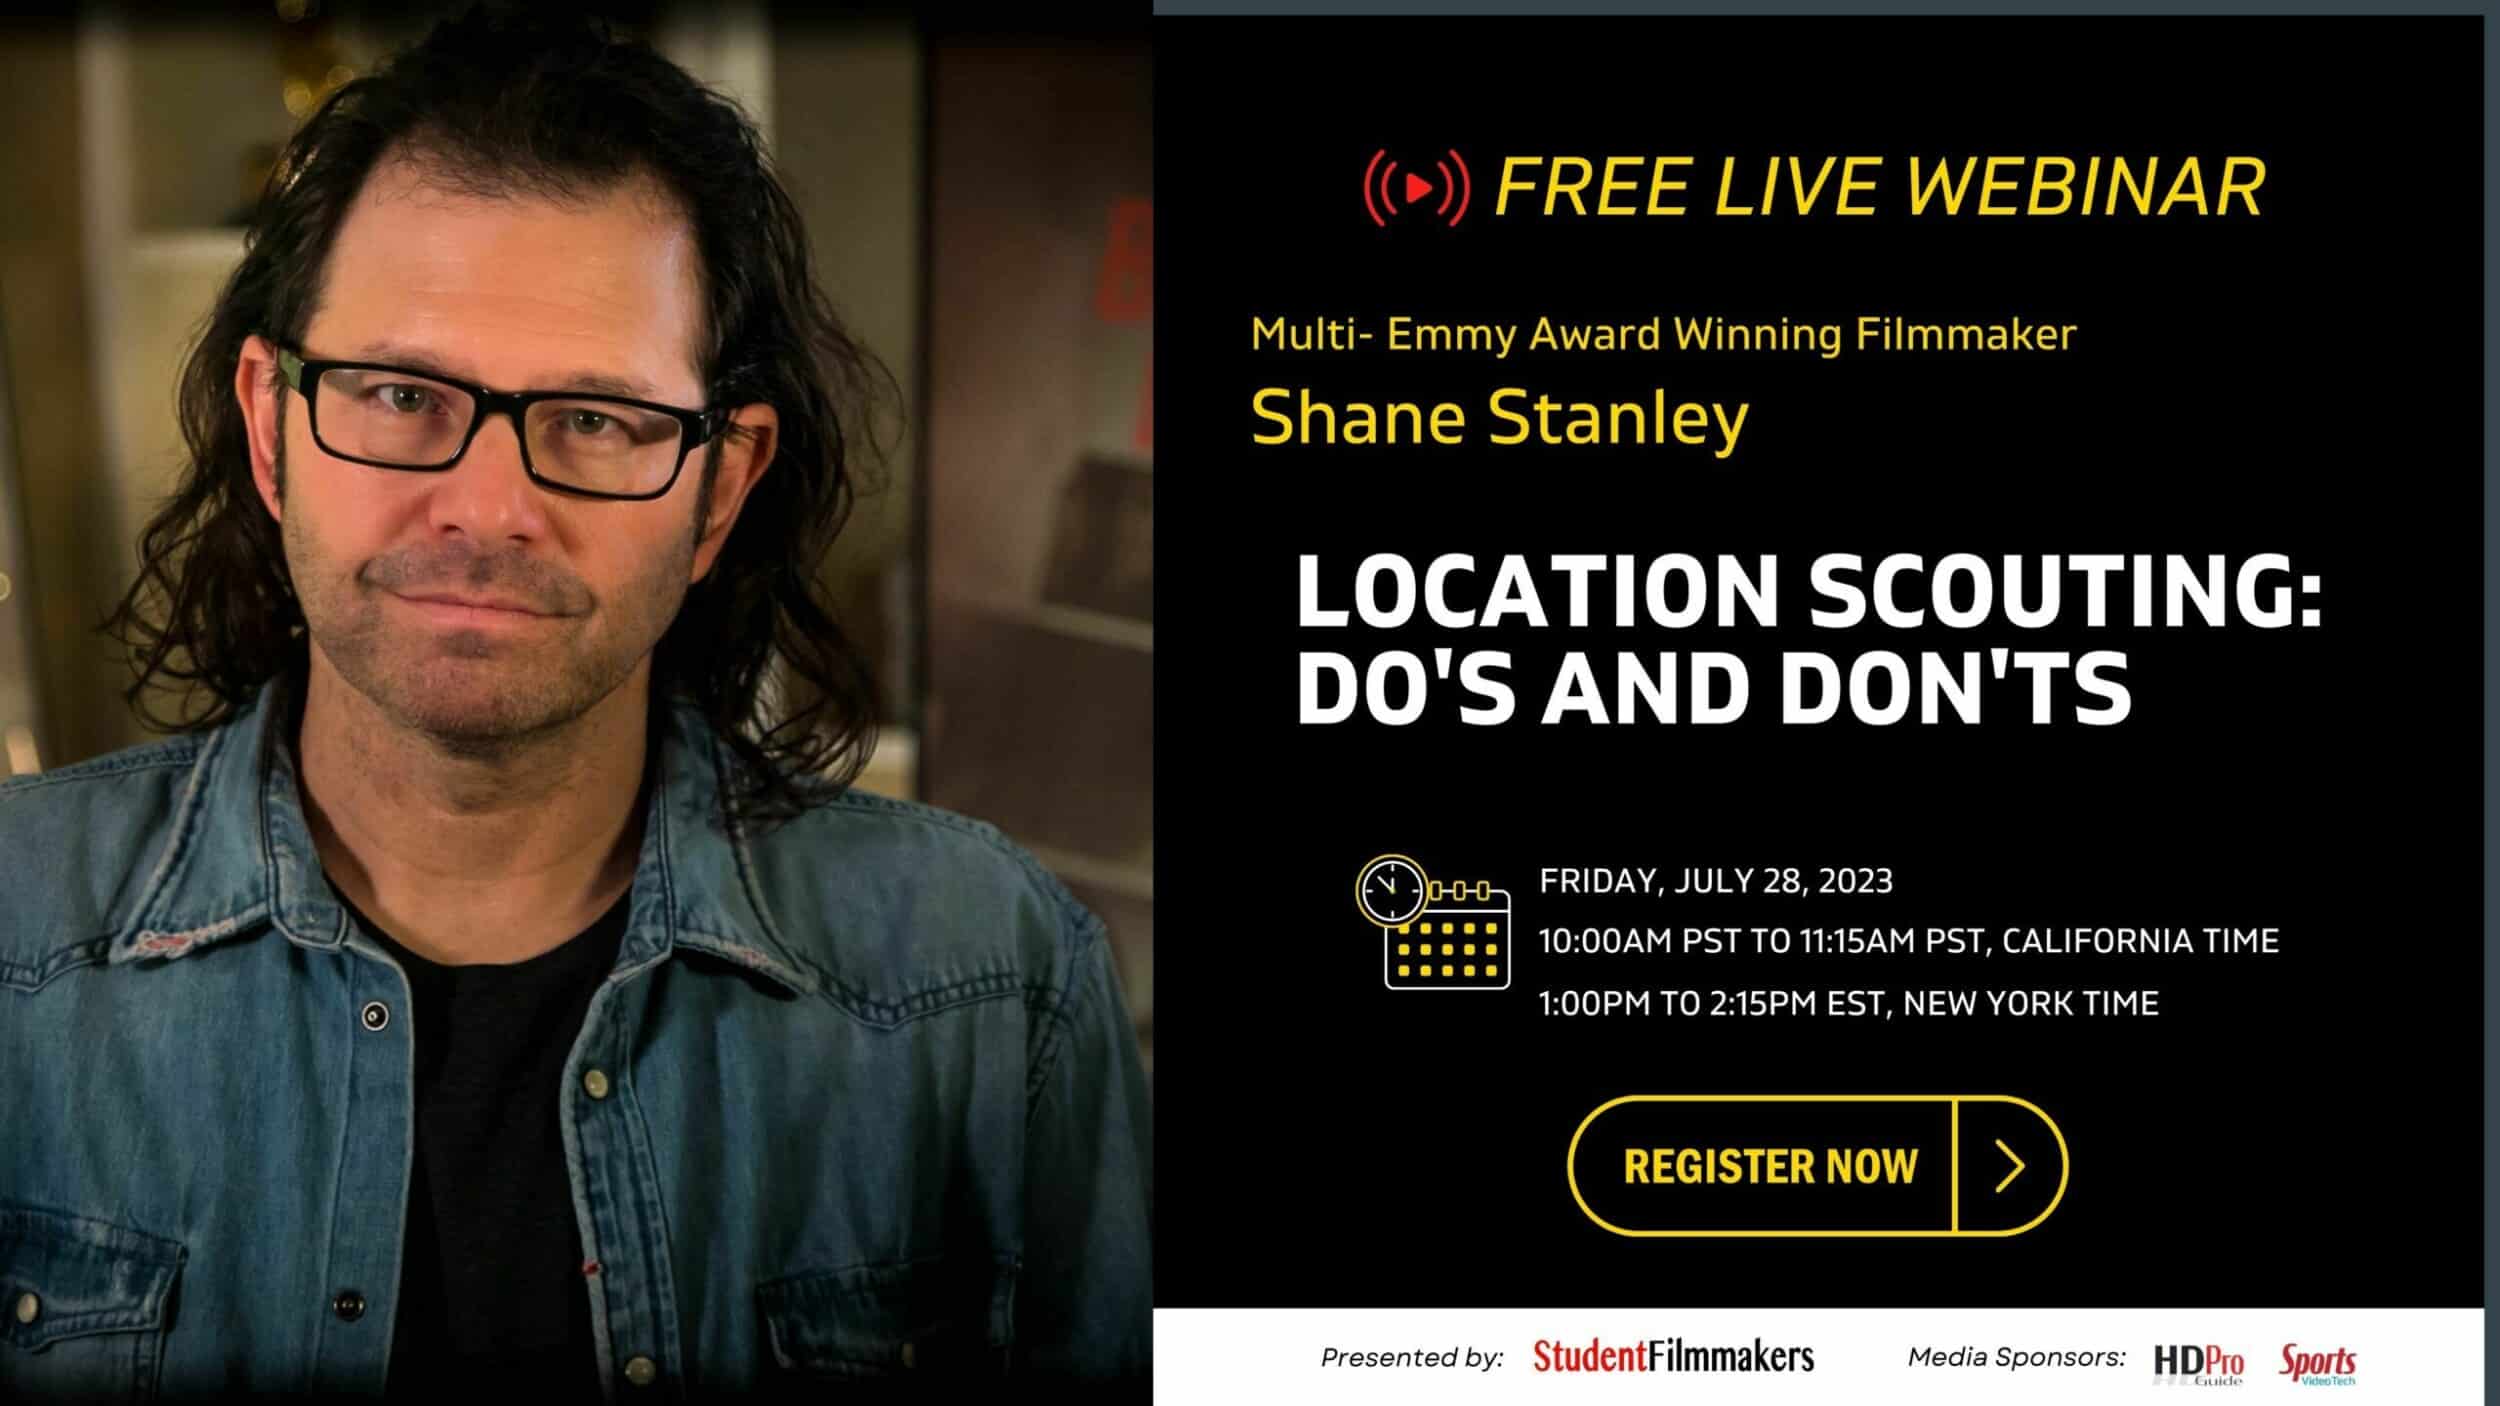 REGISTER NOW! FREE LIVE WEBINAR | "Location Scouting: Do's and Don'ts" with Multi-Emmy® Award-Winning Filmmaker Shane Stanley 